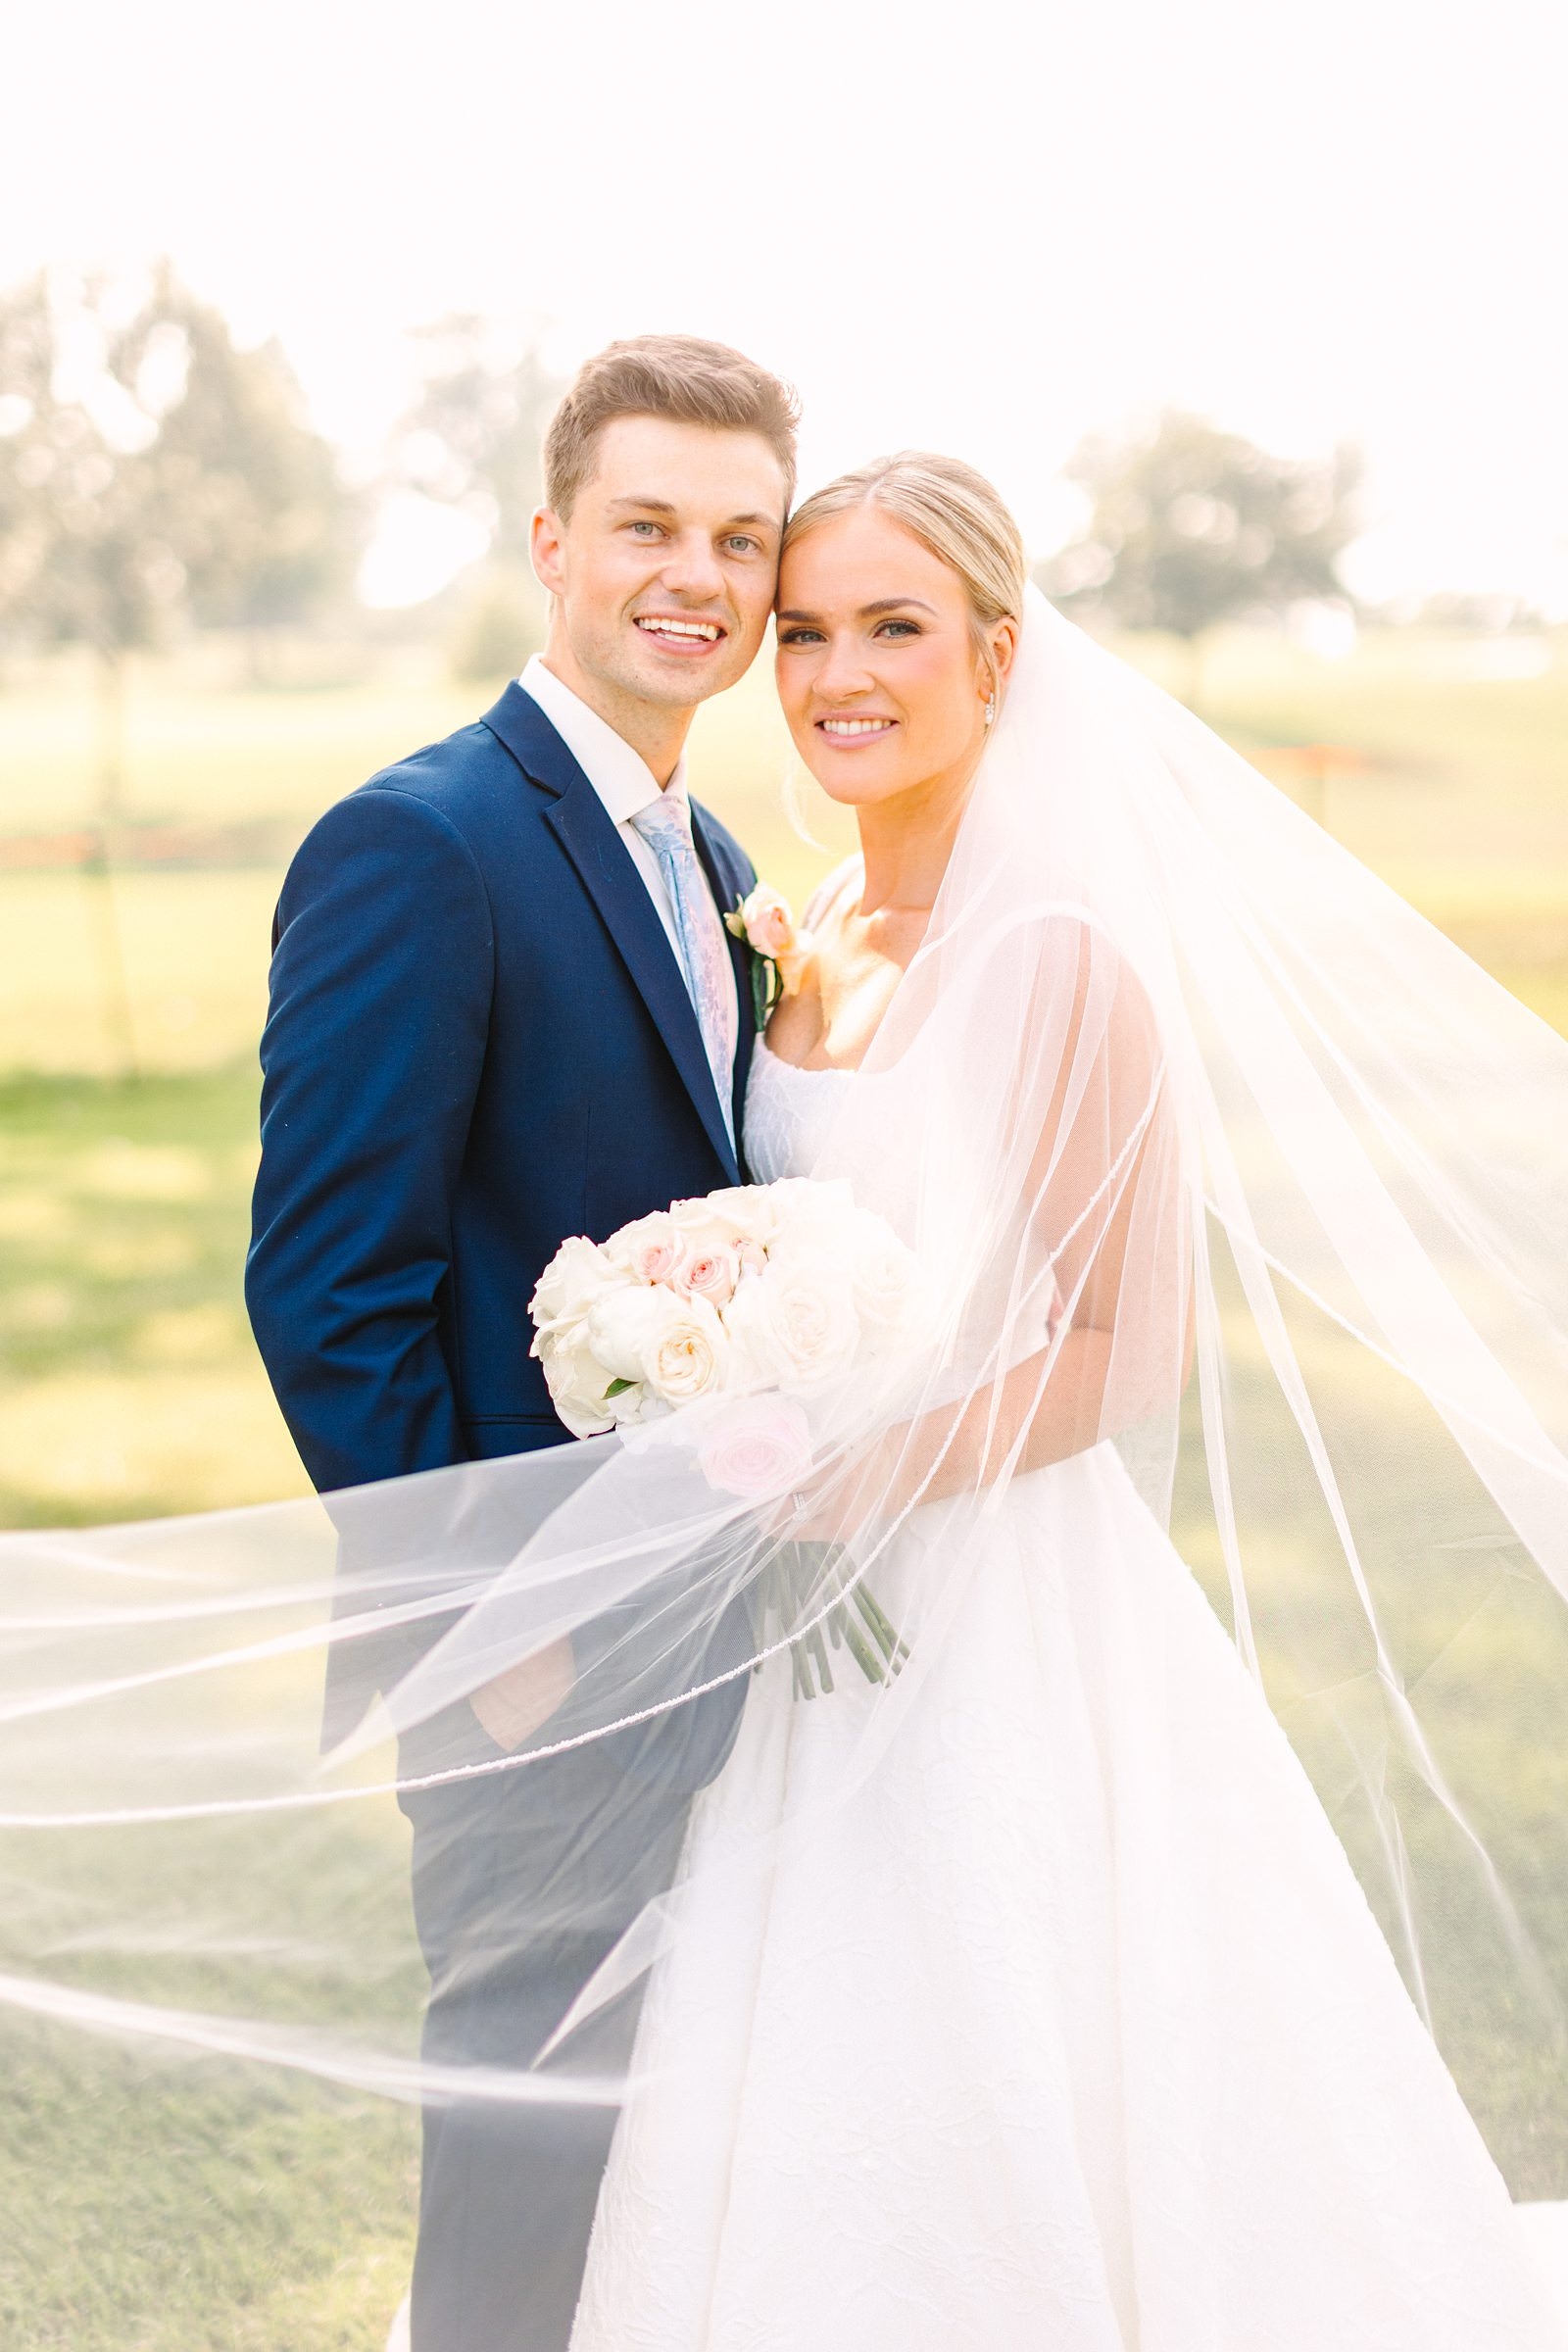 An Evansville Country Club Wedding | Ashley and Beau | Bret and Brandie Photography173.jpg